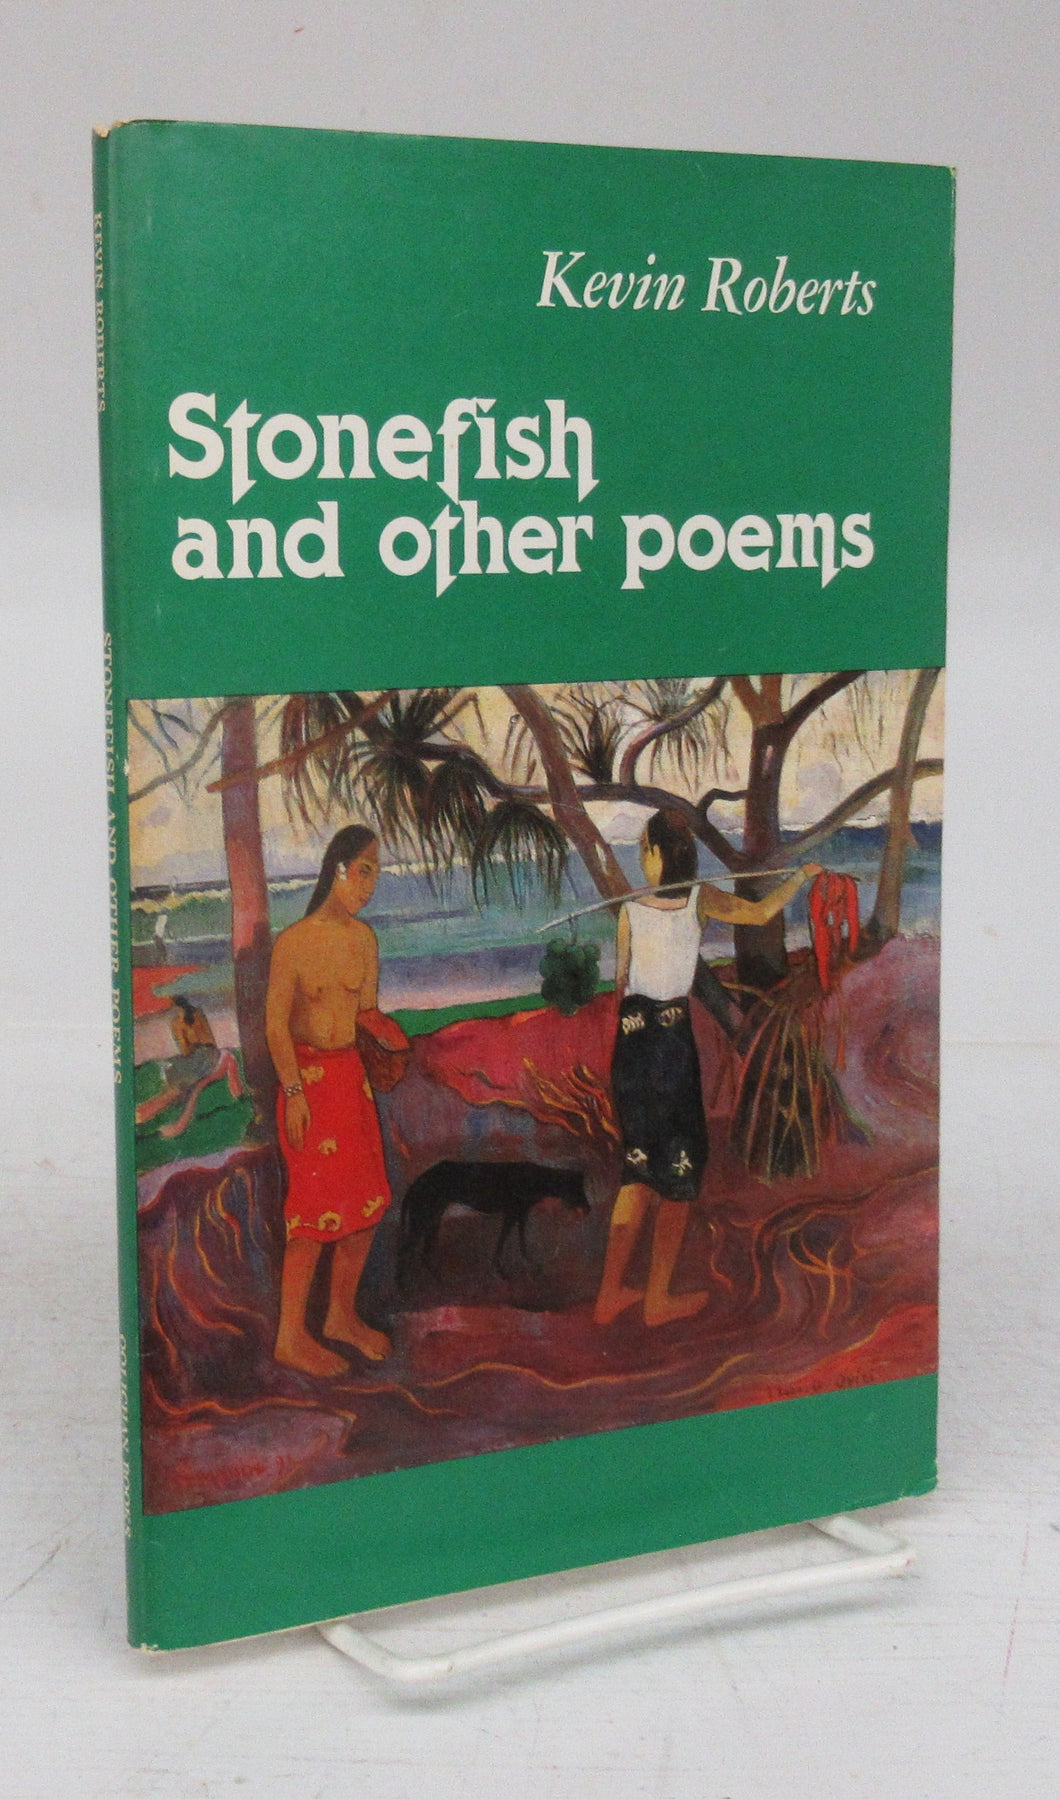 Stonefish and other poems